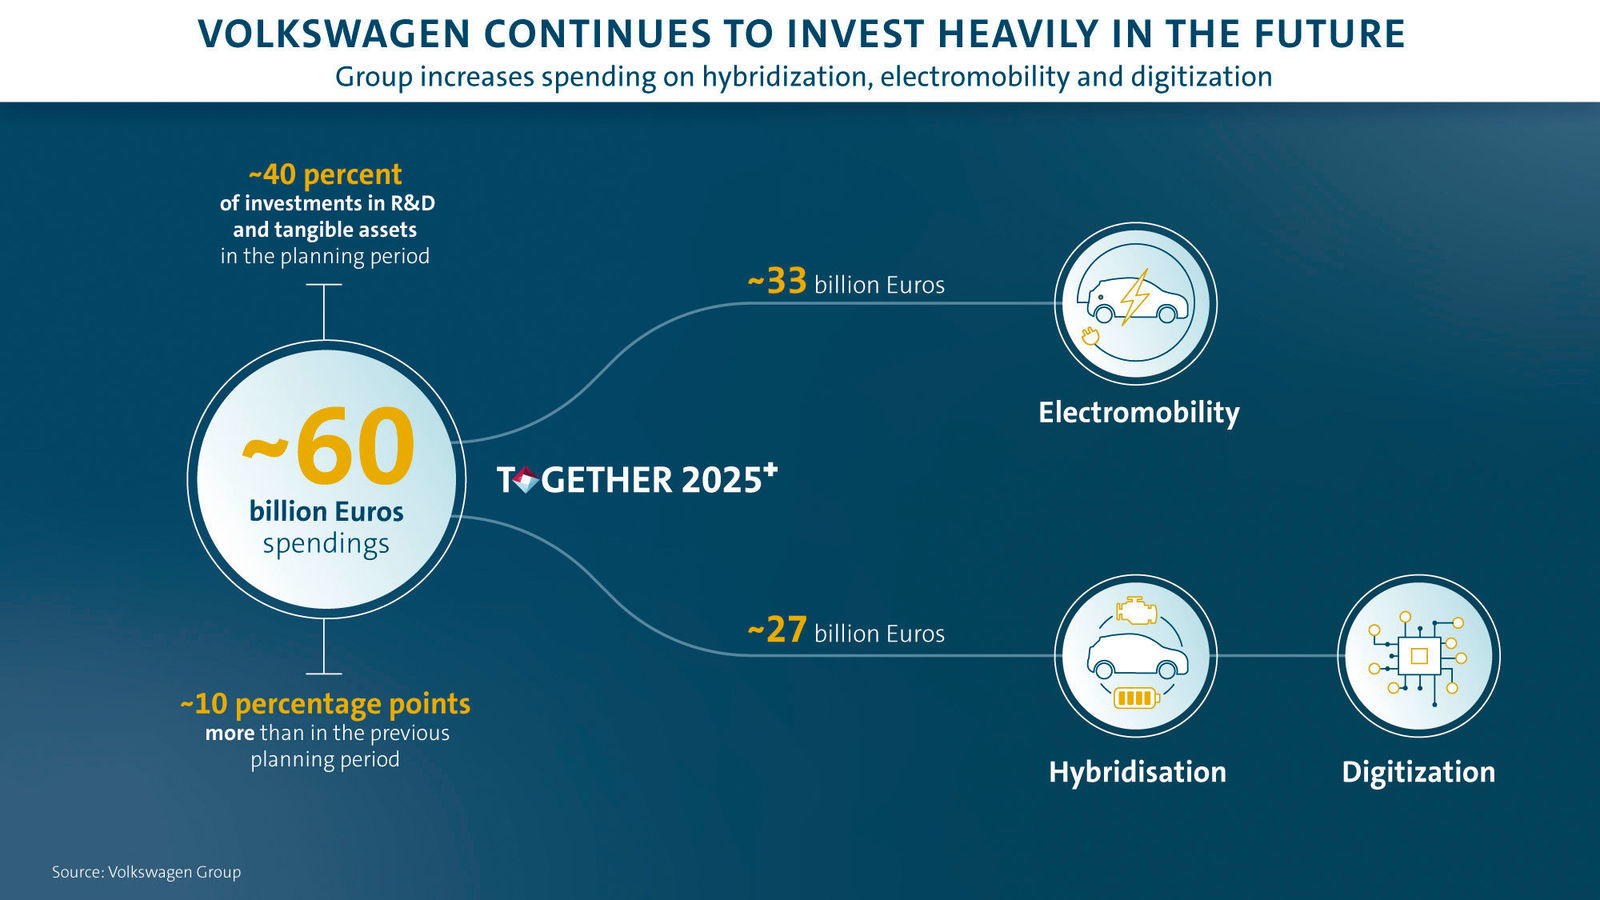 Volkswagen investing strongly in the future